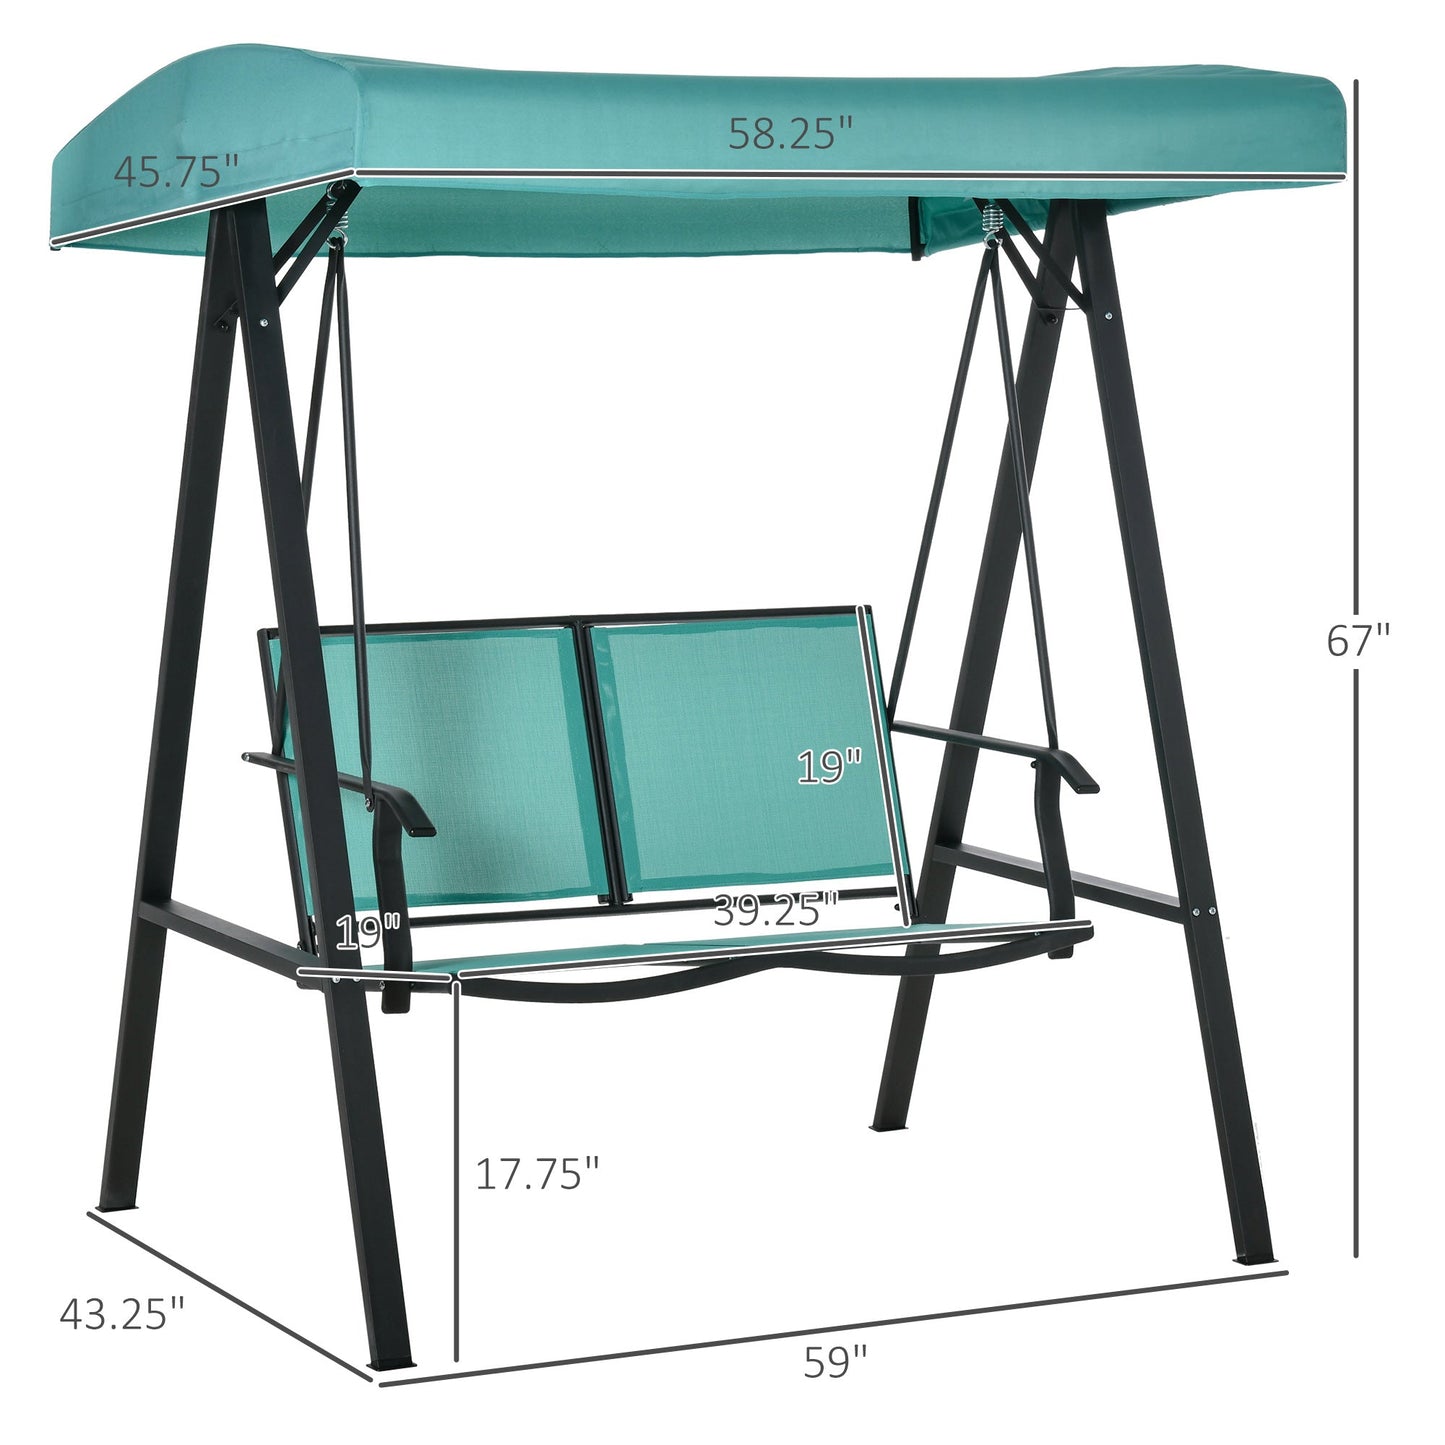 Outdoor and Garden-2-Person Patio Swing Chair Outdoor Canopy Swing with Adjustable Shade, Breathable Mesh Seats and Steel Frame for Garden, Backyard, Blue - Outdoor Style Company